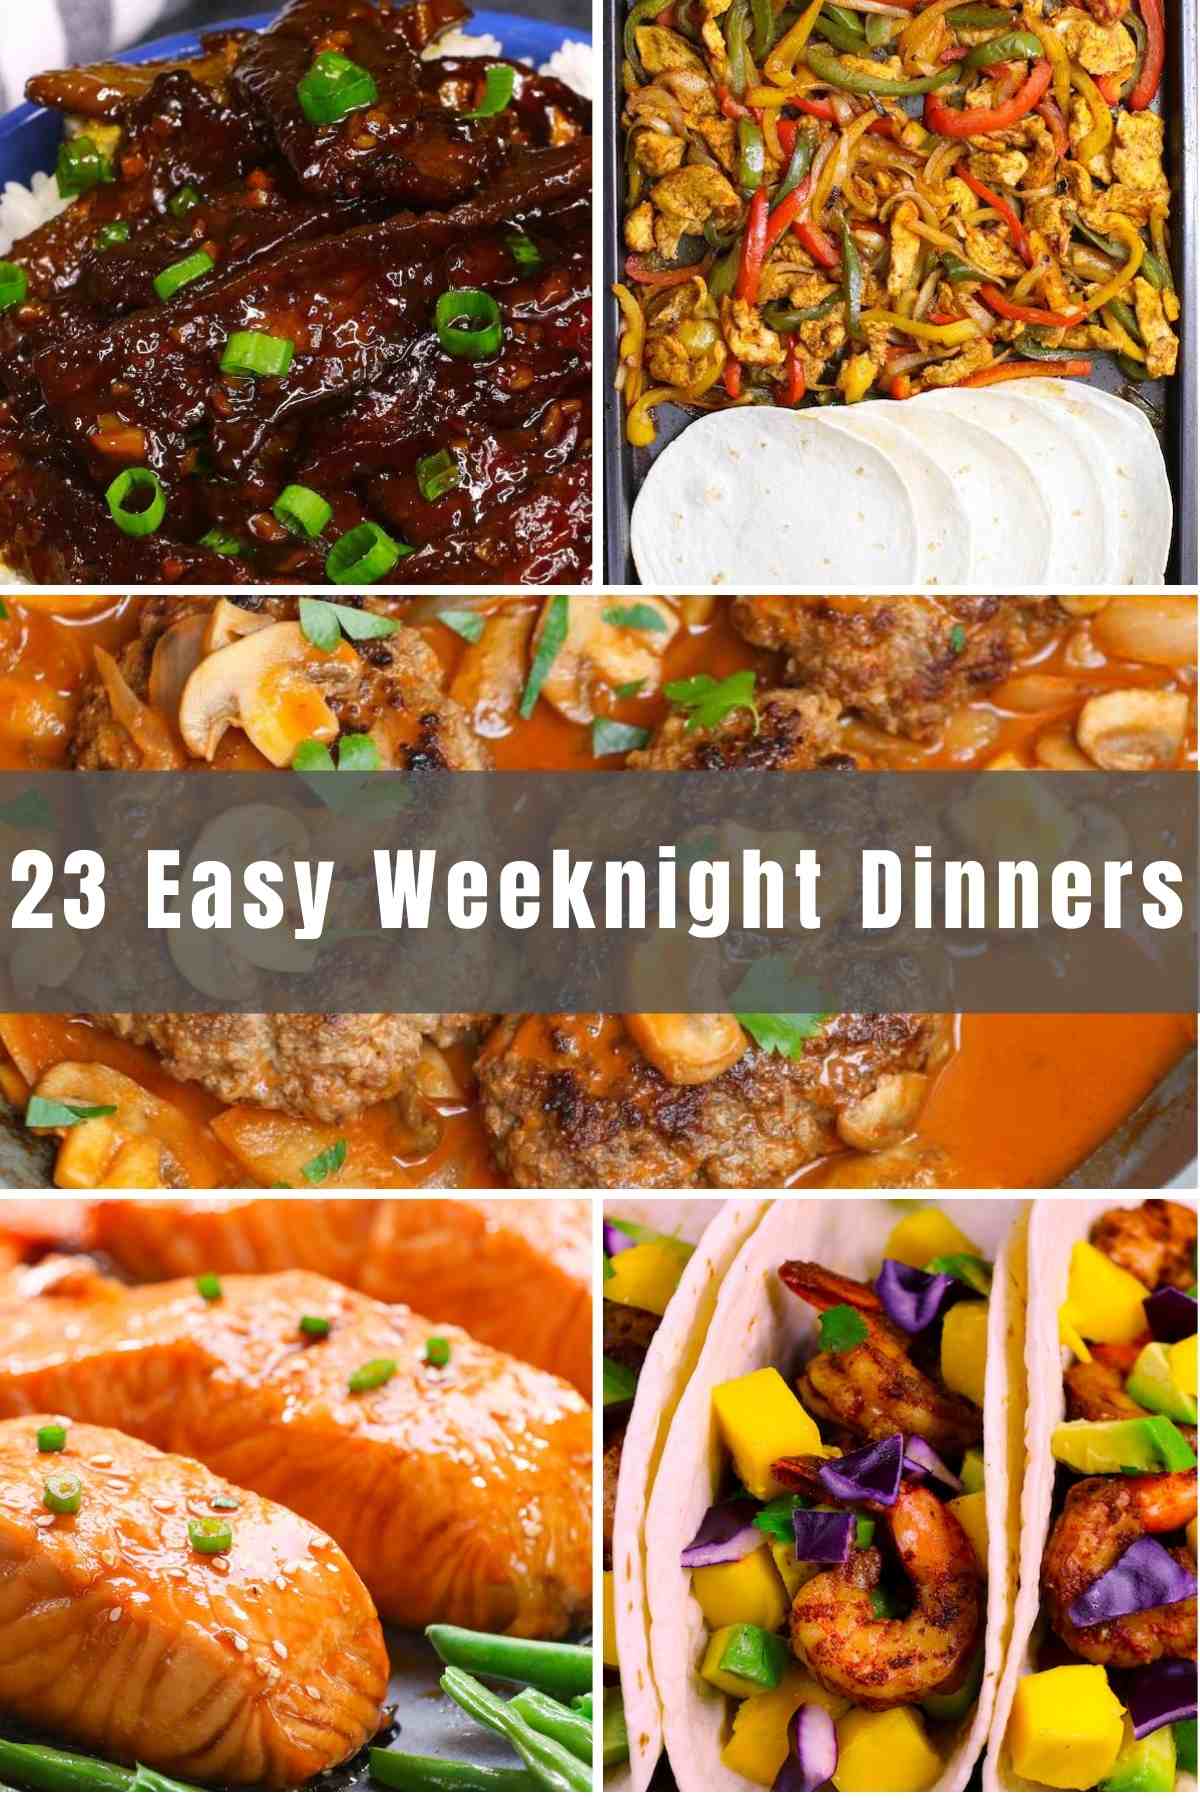 After a long day at work, we’ll prefer to have a quick and easy meal at night. We’ve rounded up 23 of the best Easy Weeknight Dinners that are sure to blow your taste buds away!